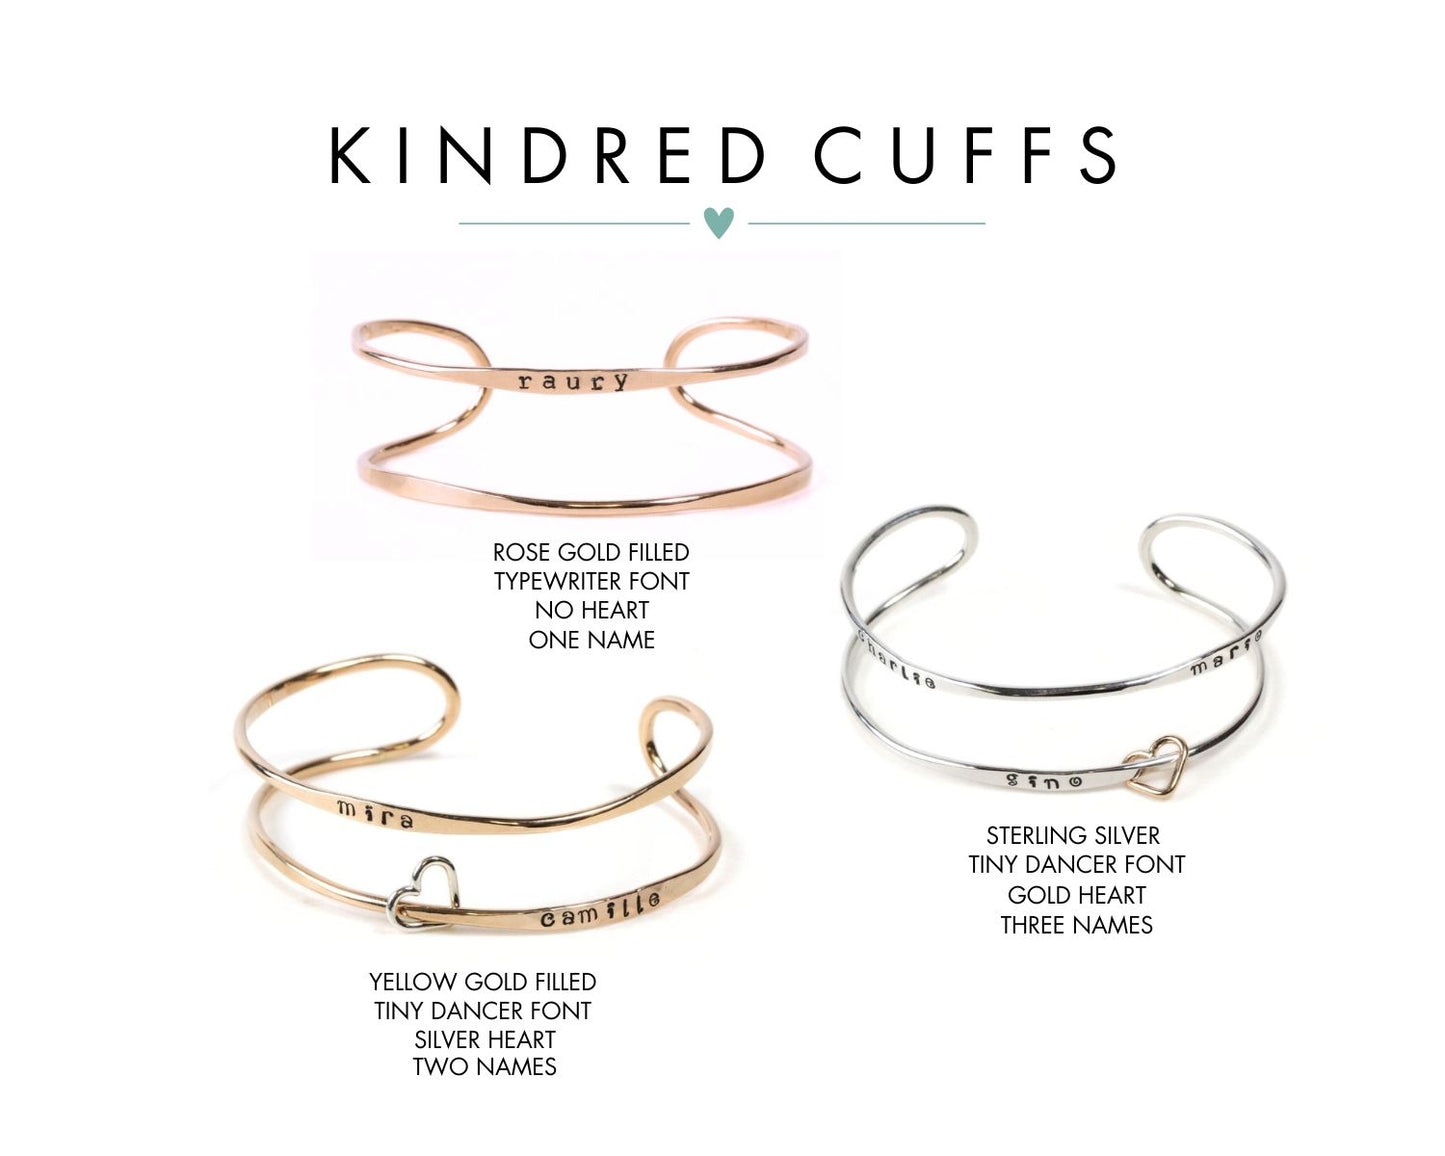 Personalized Kindred Cuffs